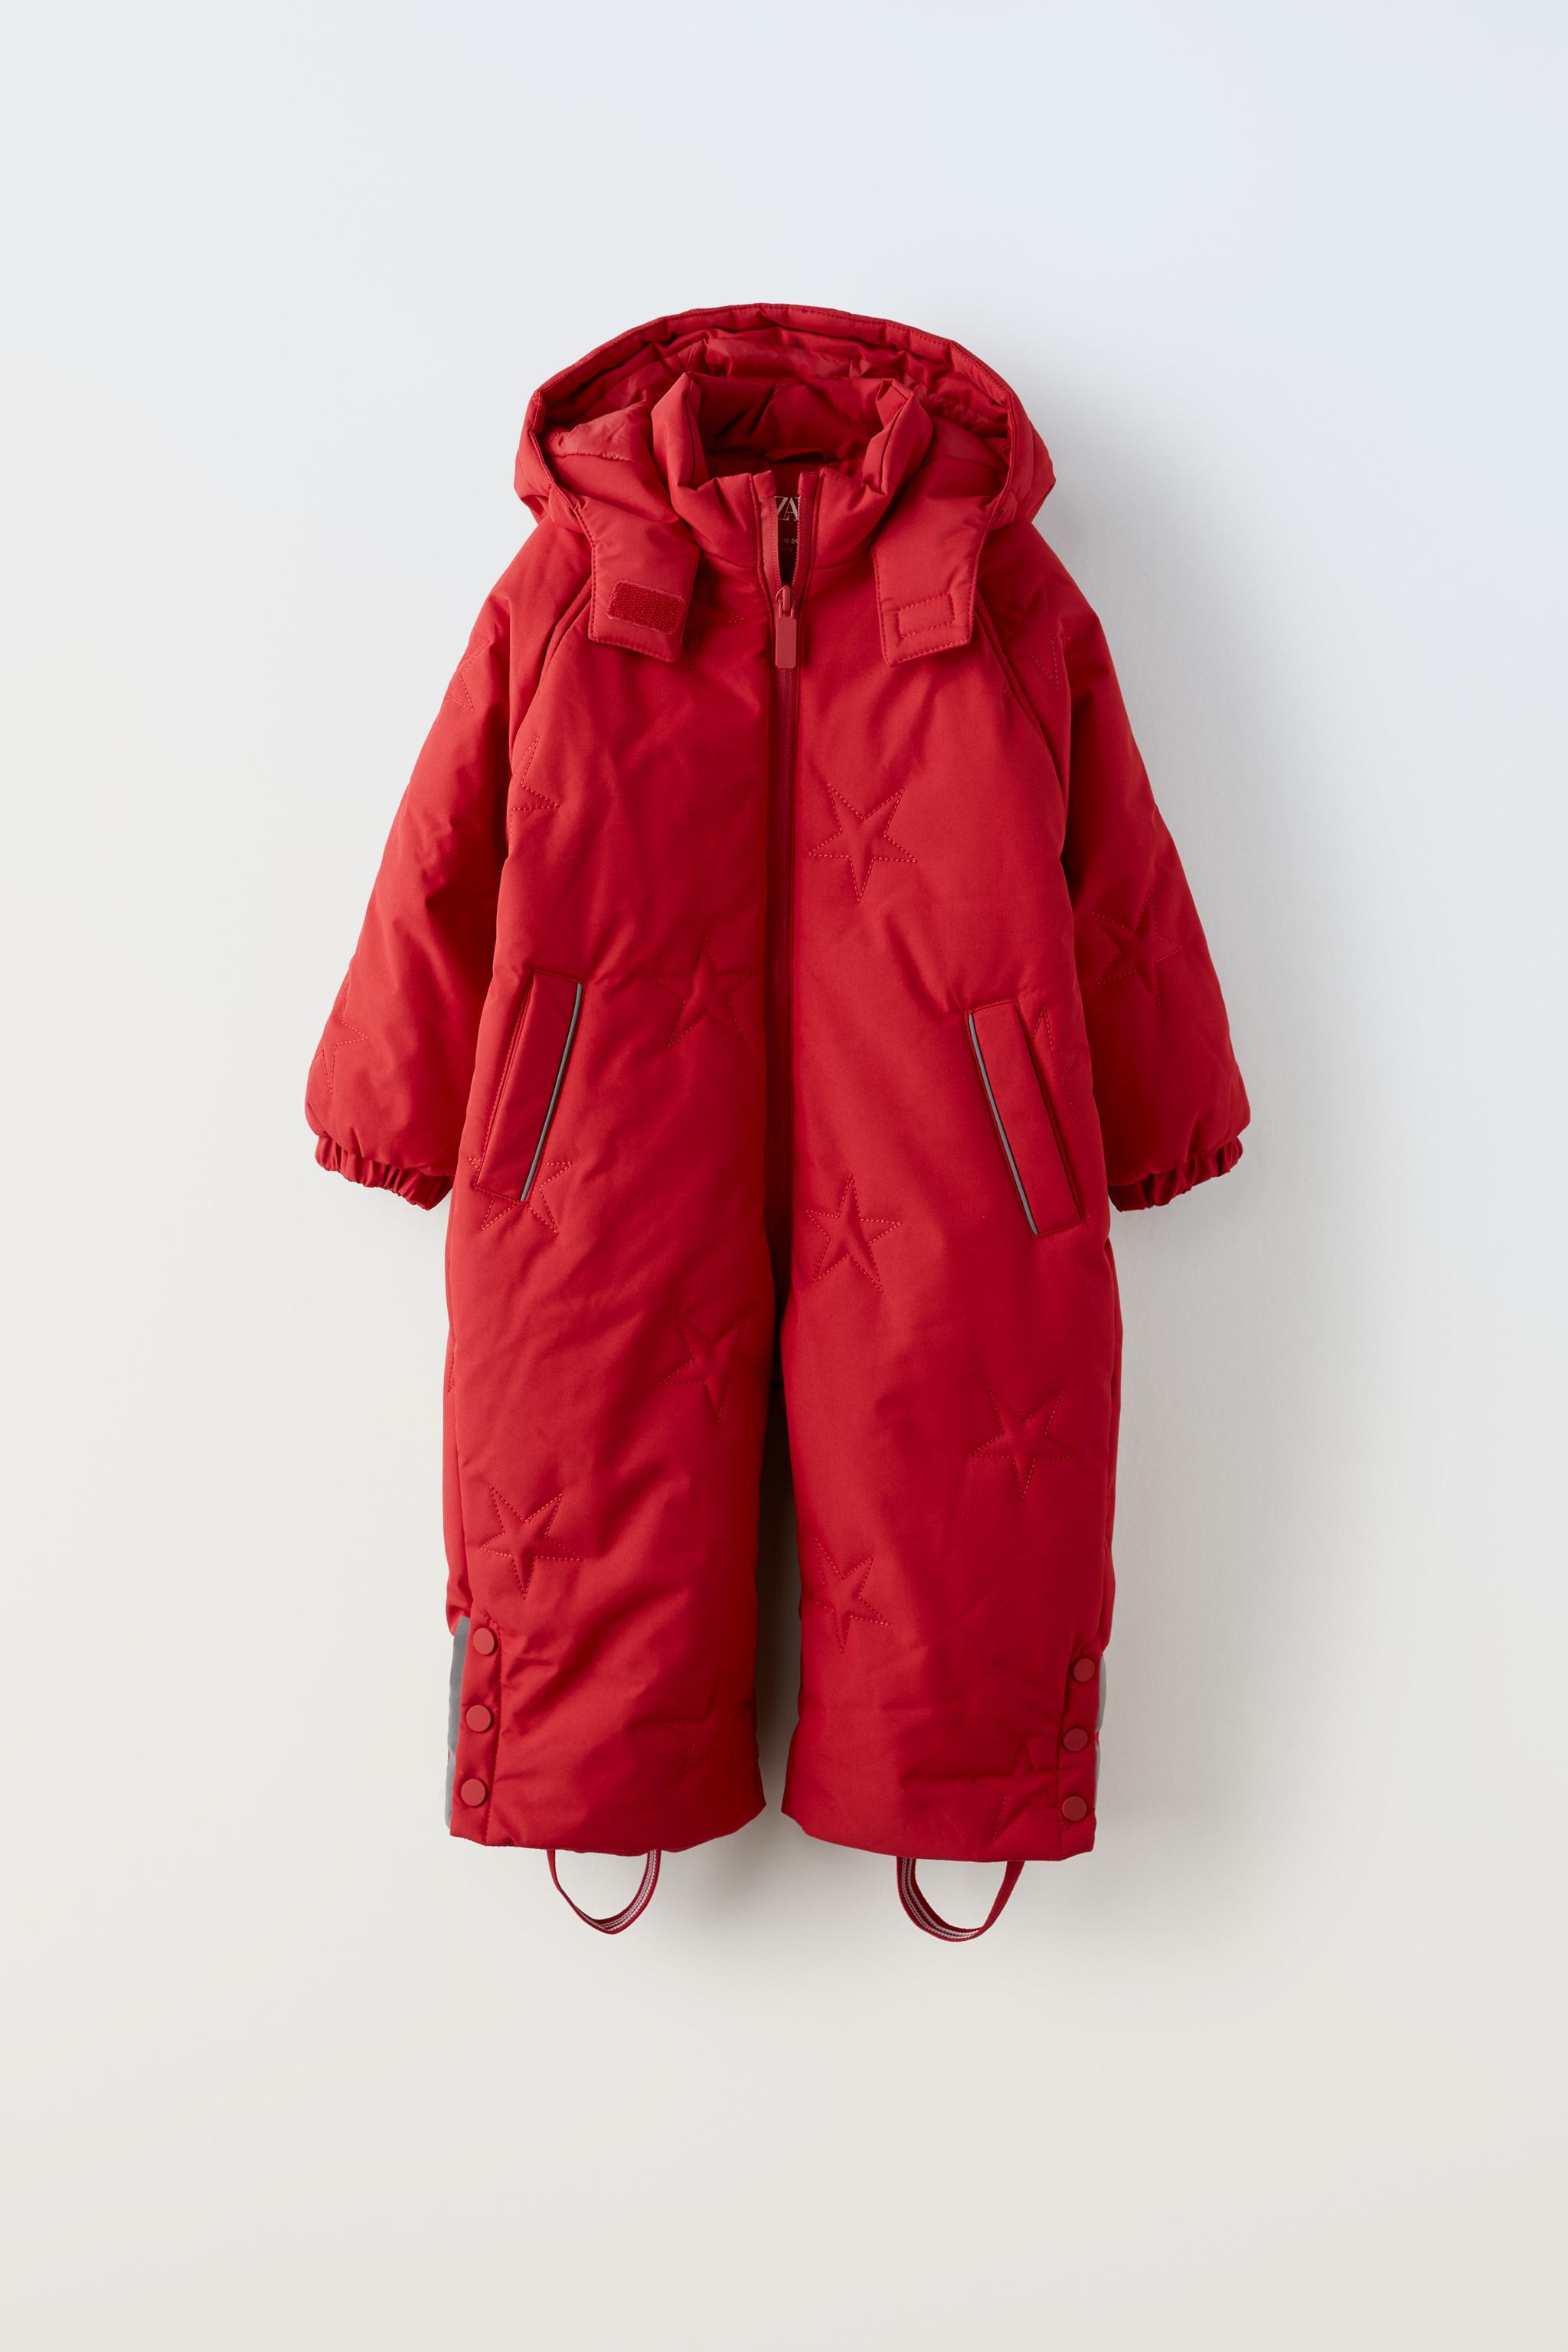 SKI COLLECTION キルティング WATER-REPELLENT AND